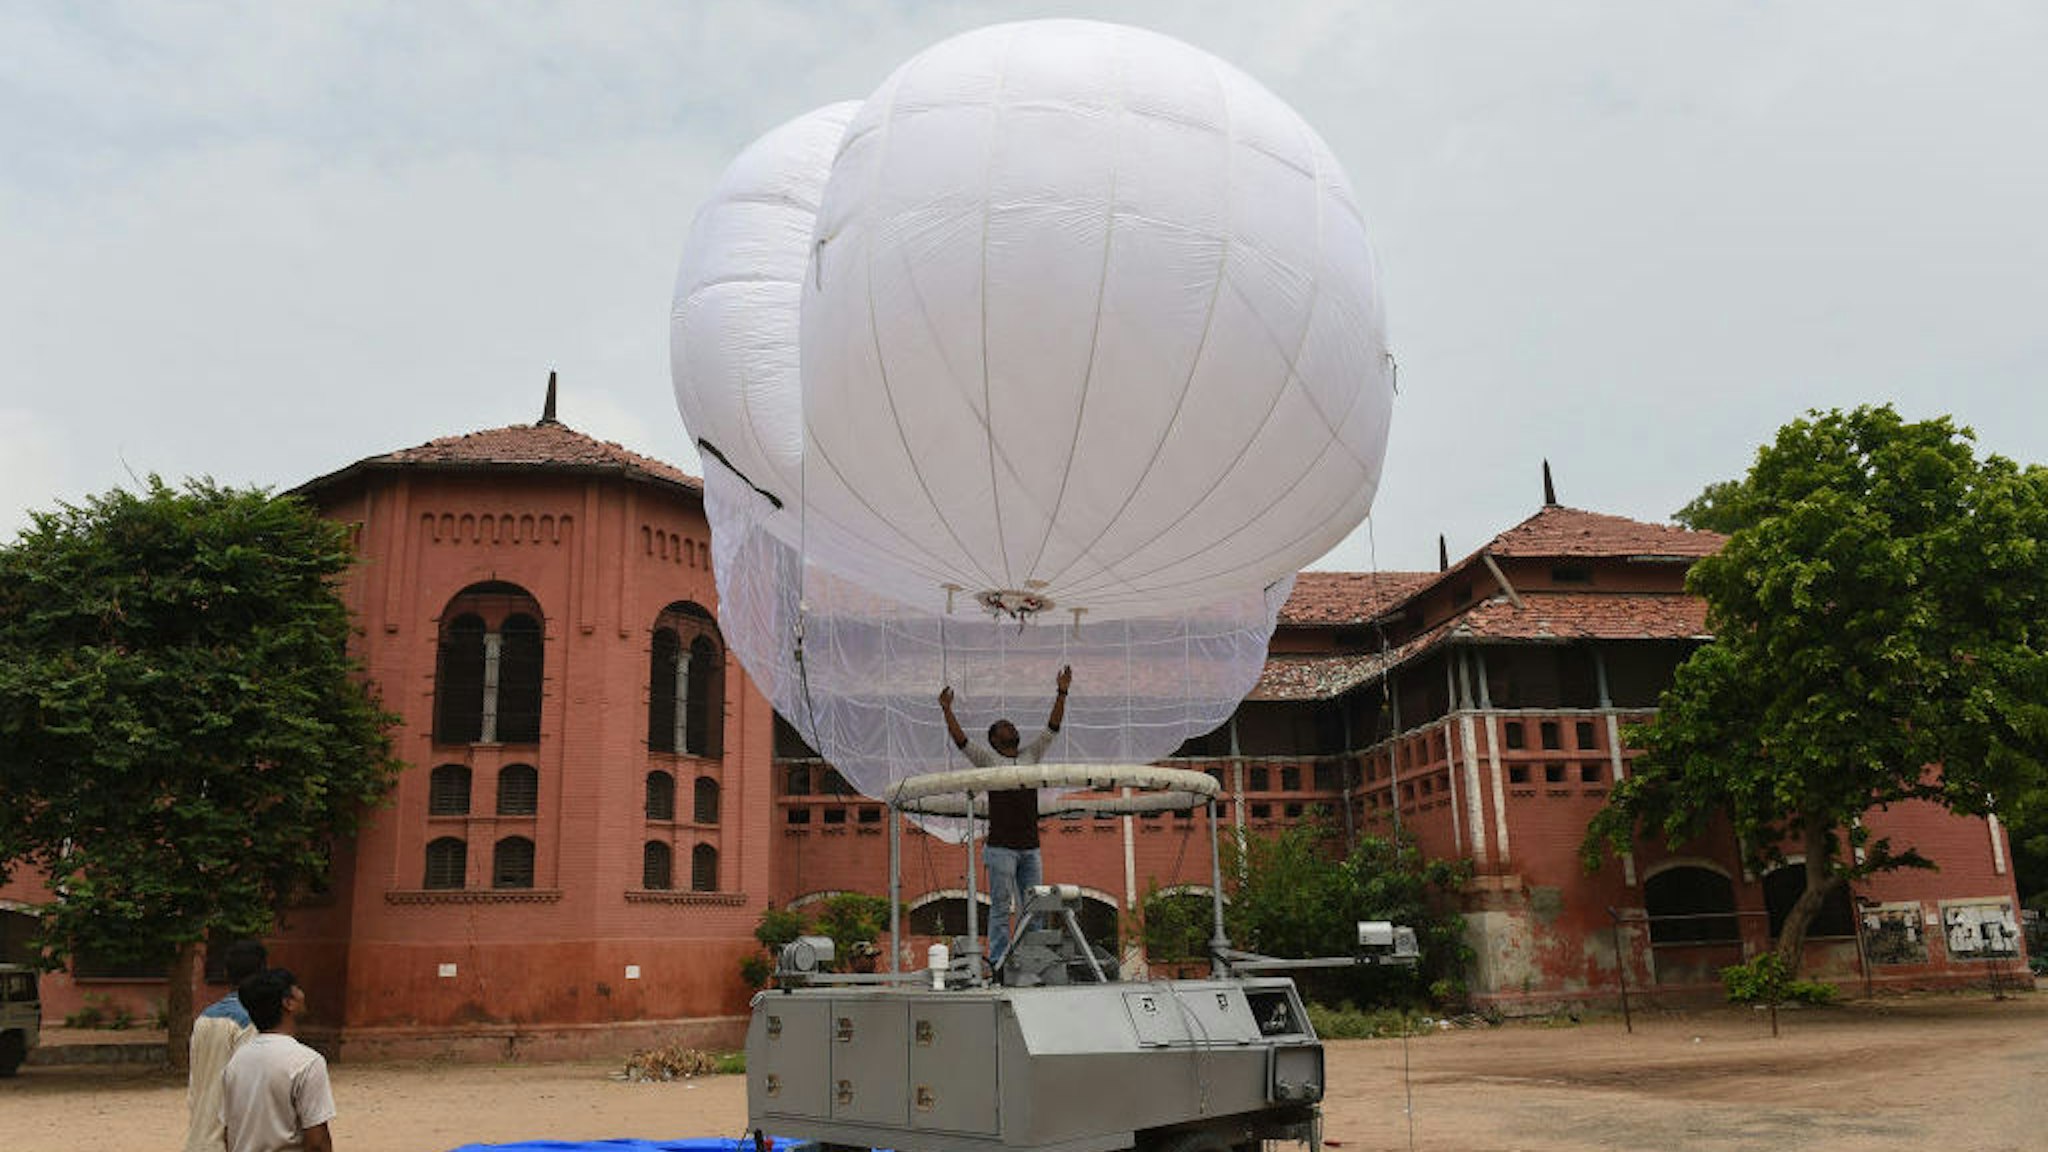 Indian technicians from Tata Power and Indian Border Security Force (BSF) assemble an Israeli-made surveillance Aerostat Balloon in Ahmedabad on July 13, 2018. - The Aerostat Balloon, which reaches a height of 250 metres and provides surveillance over a 5km radius, is set to be used in Ahmedabad for the annual religious Rath Yatra chariot procession on July 14, backed by thousands of Gujarati police and paramilitary security personnel. (Photo by SAM PANTHAKY / AFP) (Photo credit should read SAM PANTHAKY/AFP via Getty Images)